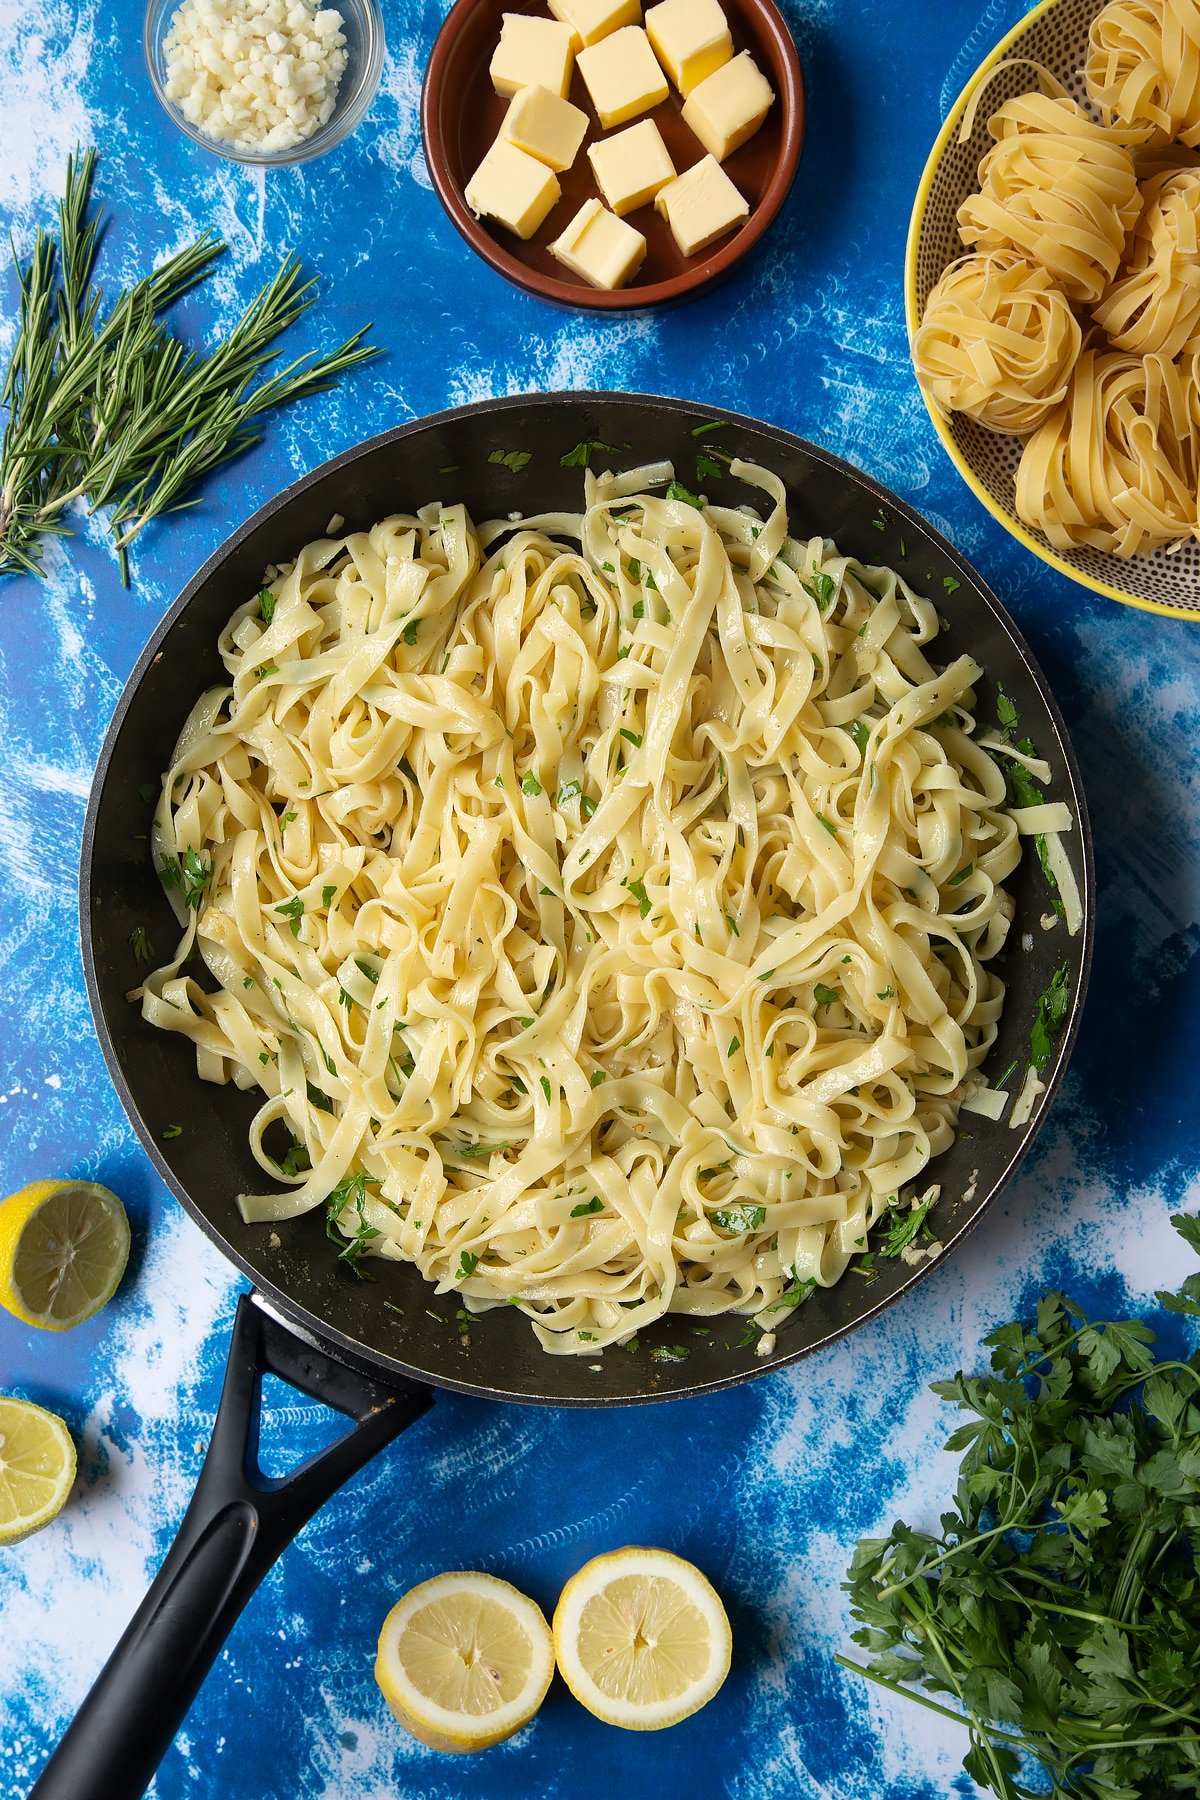 A large frying pan with tagliatelle, rosemary and parsley. Ingredients to make Dutch Yellowtail tagliatelle surround the pan.